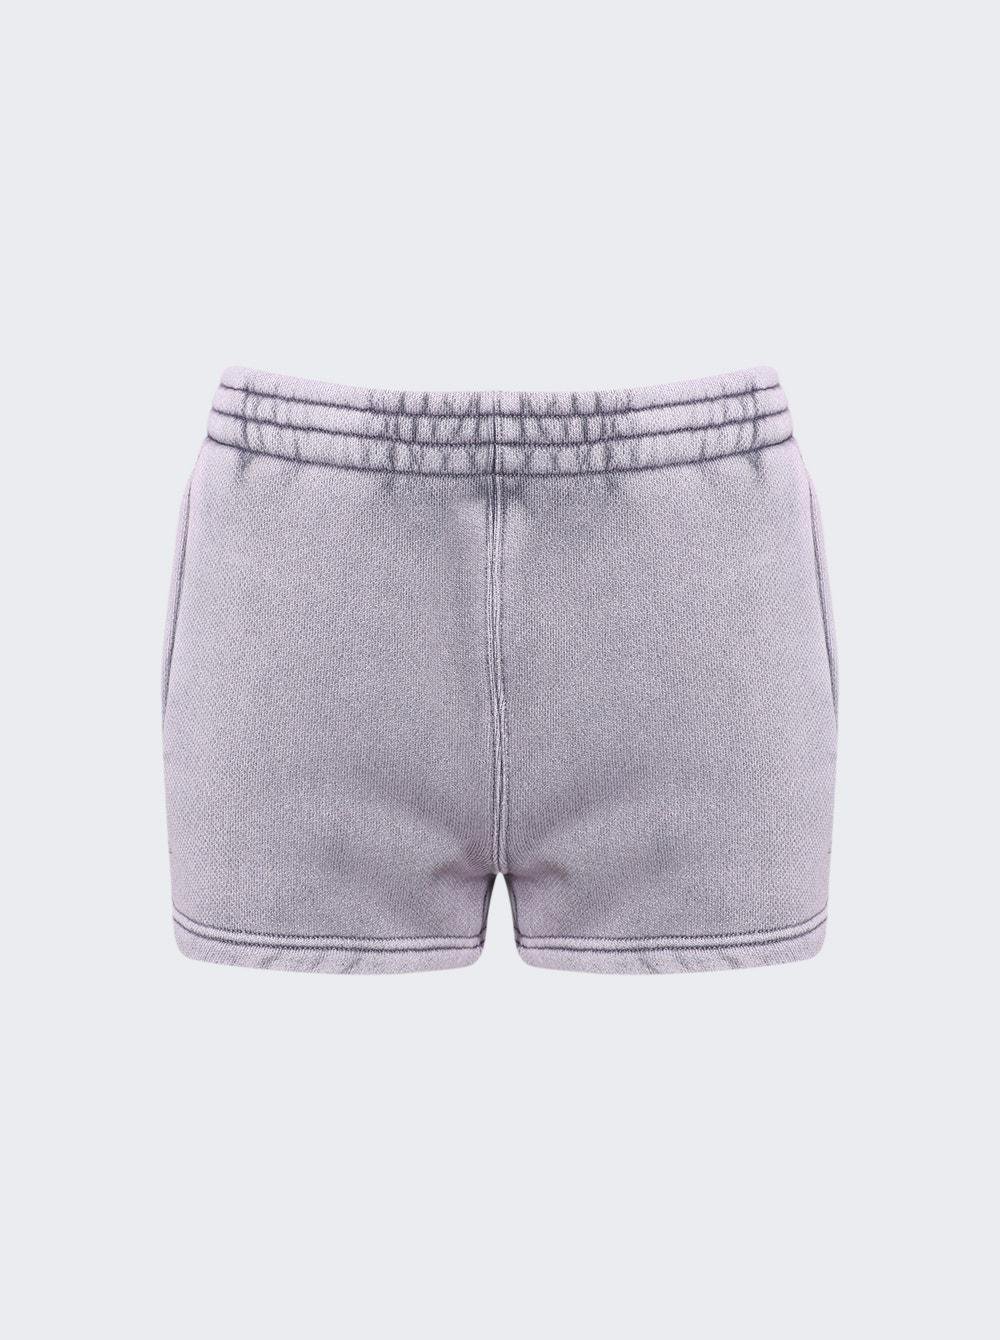 Puff Logo Sweatpants Pink Lavender  | The Webster by ALEXANDER WANG